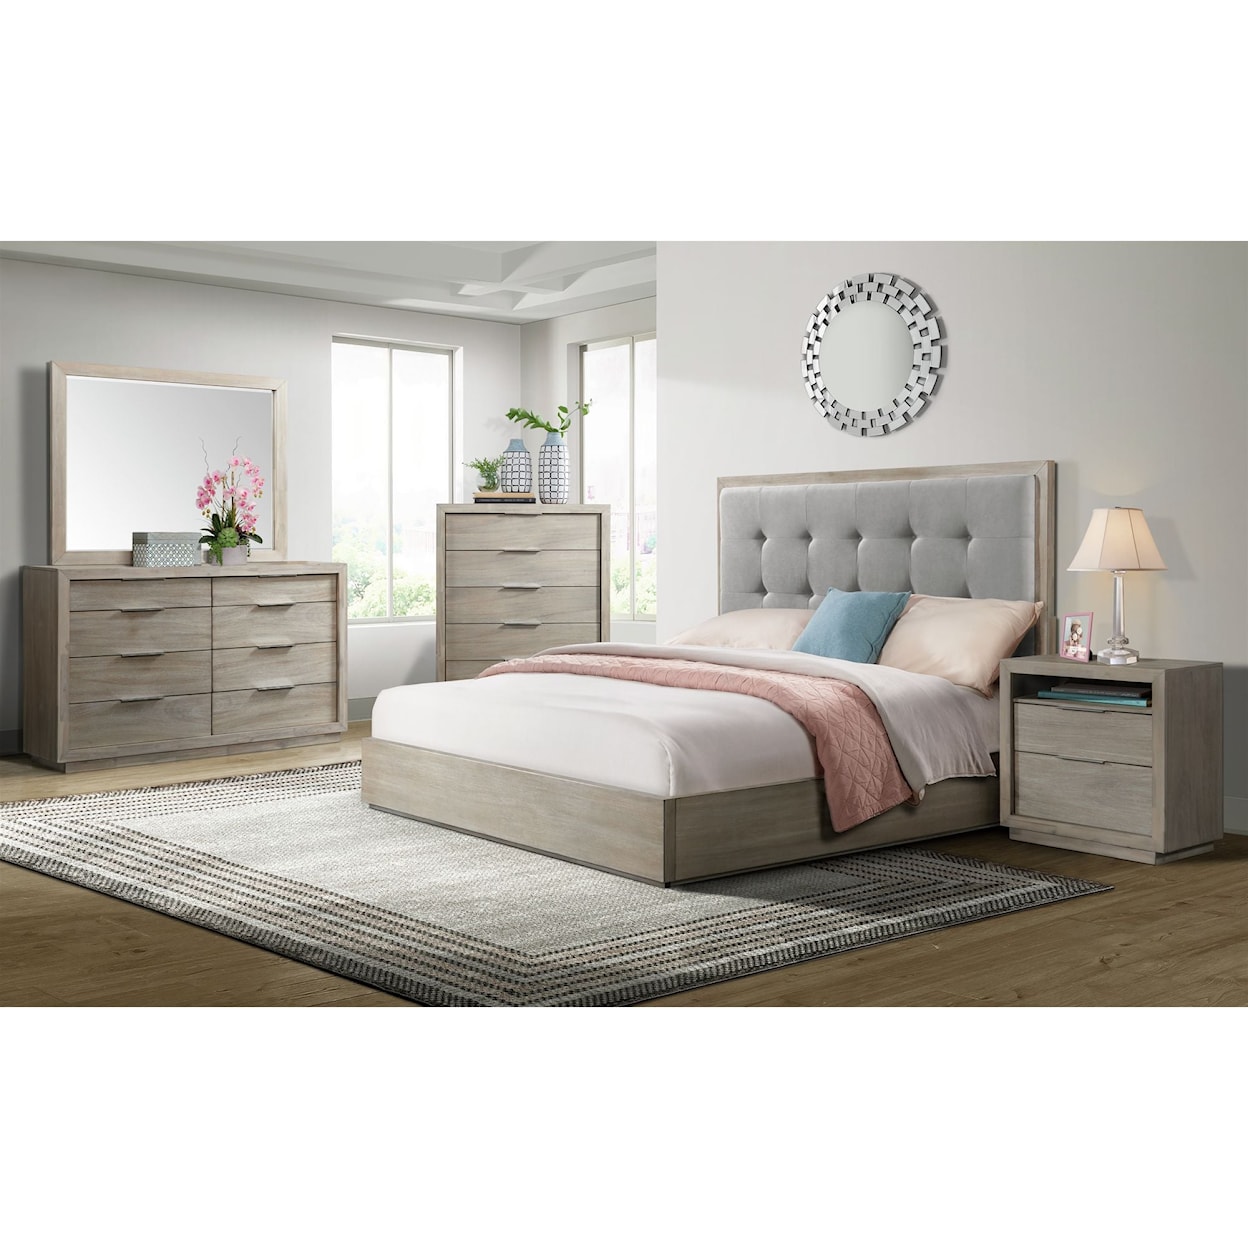 Elements International Arches ARCHES WHITE OAK QUEEN BED |